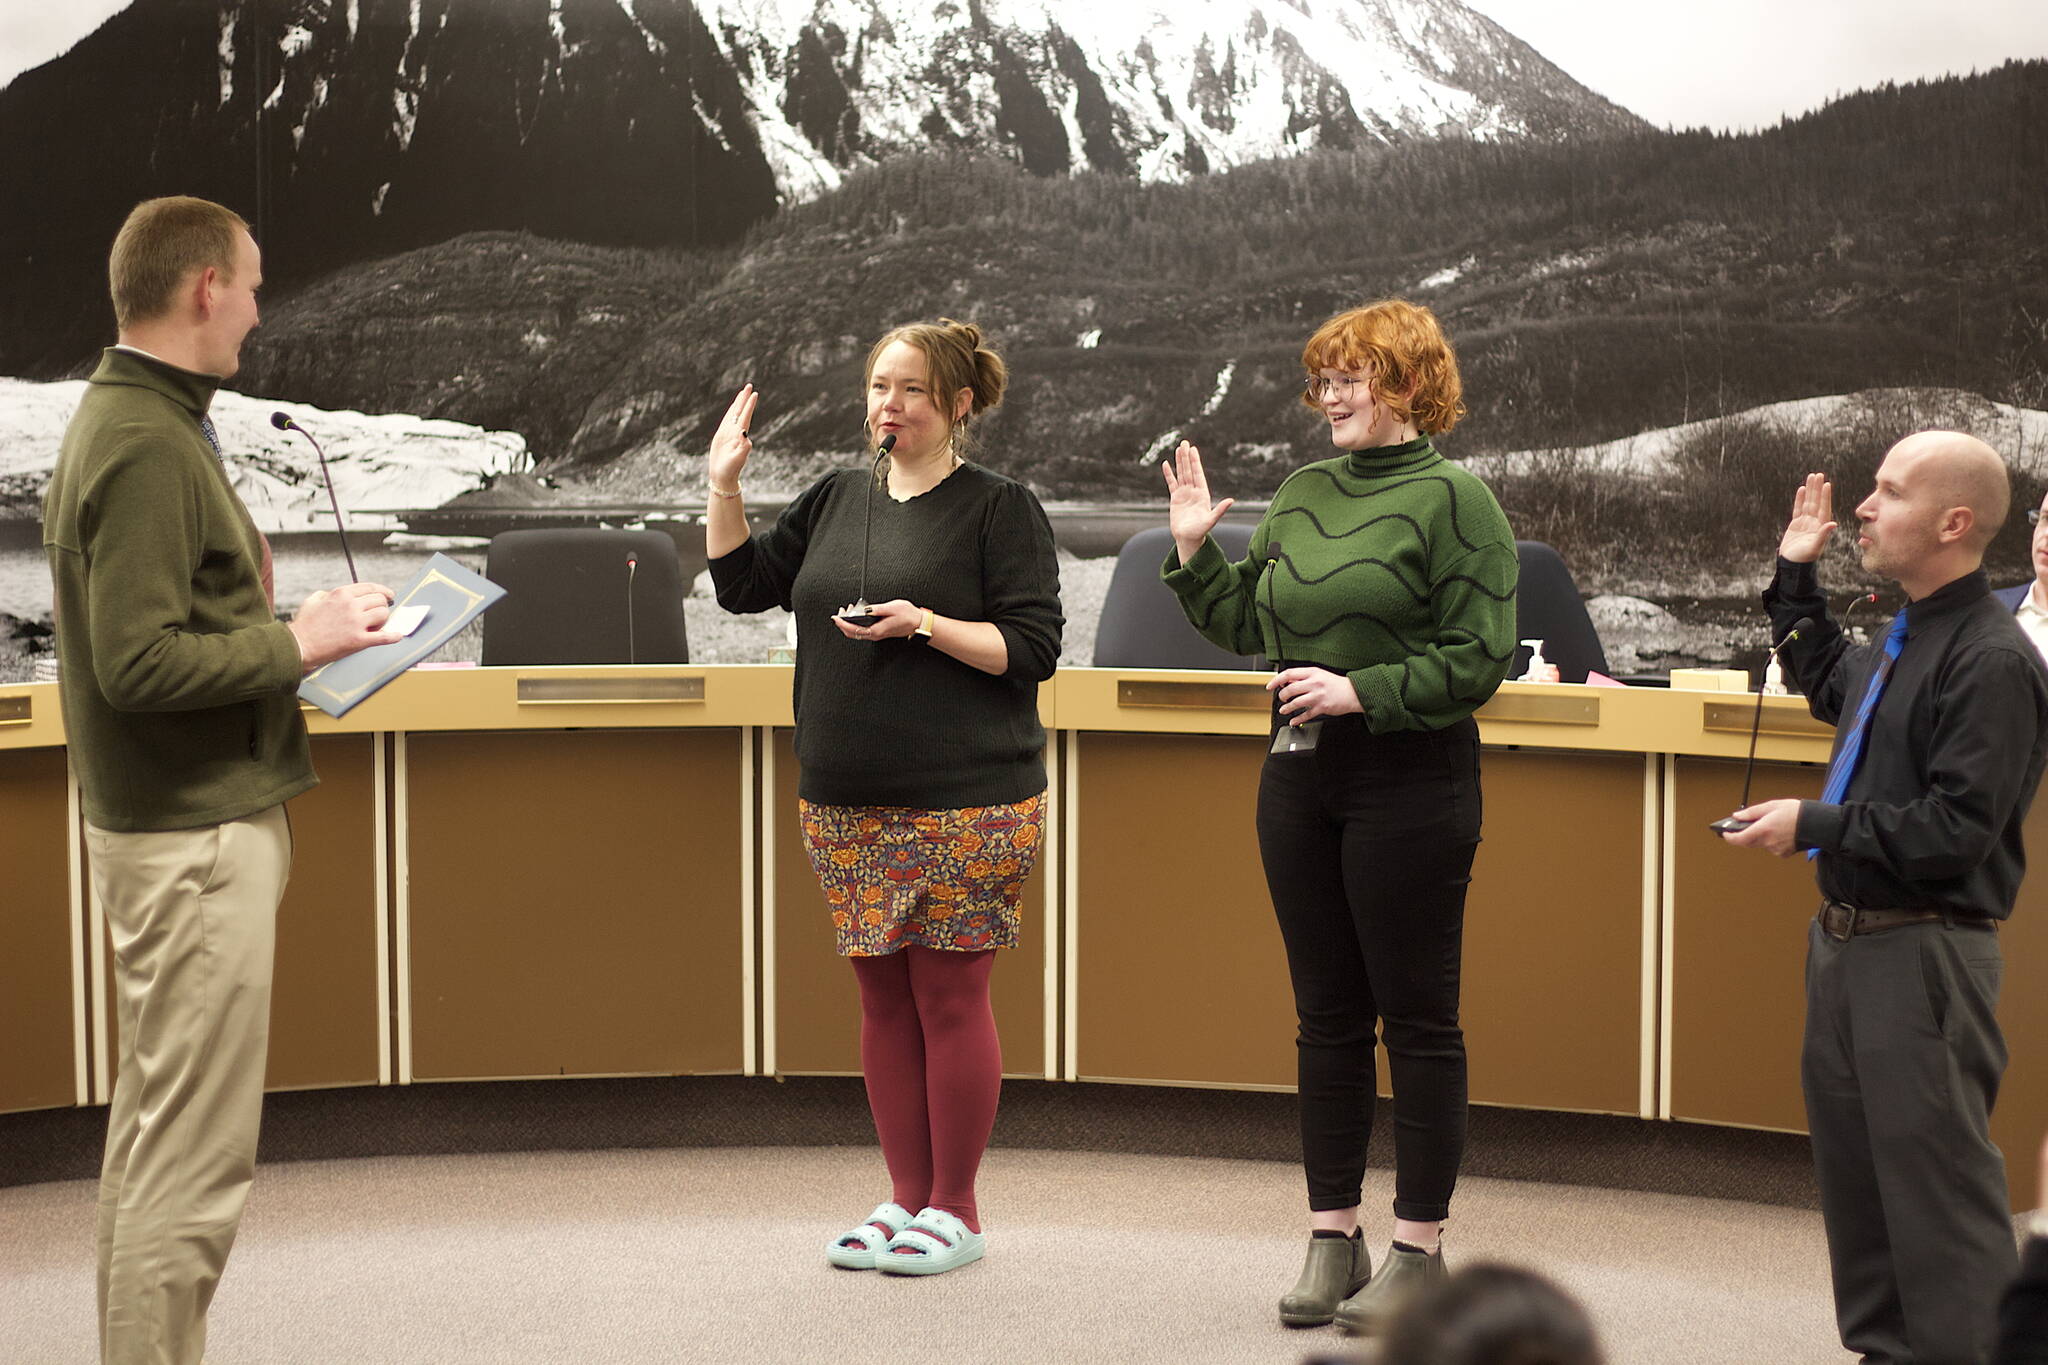 Juneau City and Borough Attorney Robert Palmer, left, swears in Assembly members Alicia Hughes-Skandijs, Ella Adkison and Paul Kelly on Monday night in the Assembly chambers. Adkison and Kelly are new members of the Assembly after winning open seats in the Oct. 3 municipal election, while incumbents Hughes-Skandijs and Christine Woll — who was sworn in remotely via Zoom at the same time — were reelected to their seats. (Mark Sabbatini / Juneau Empire)